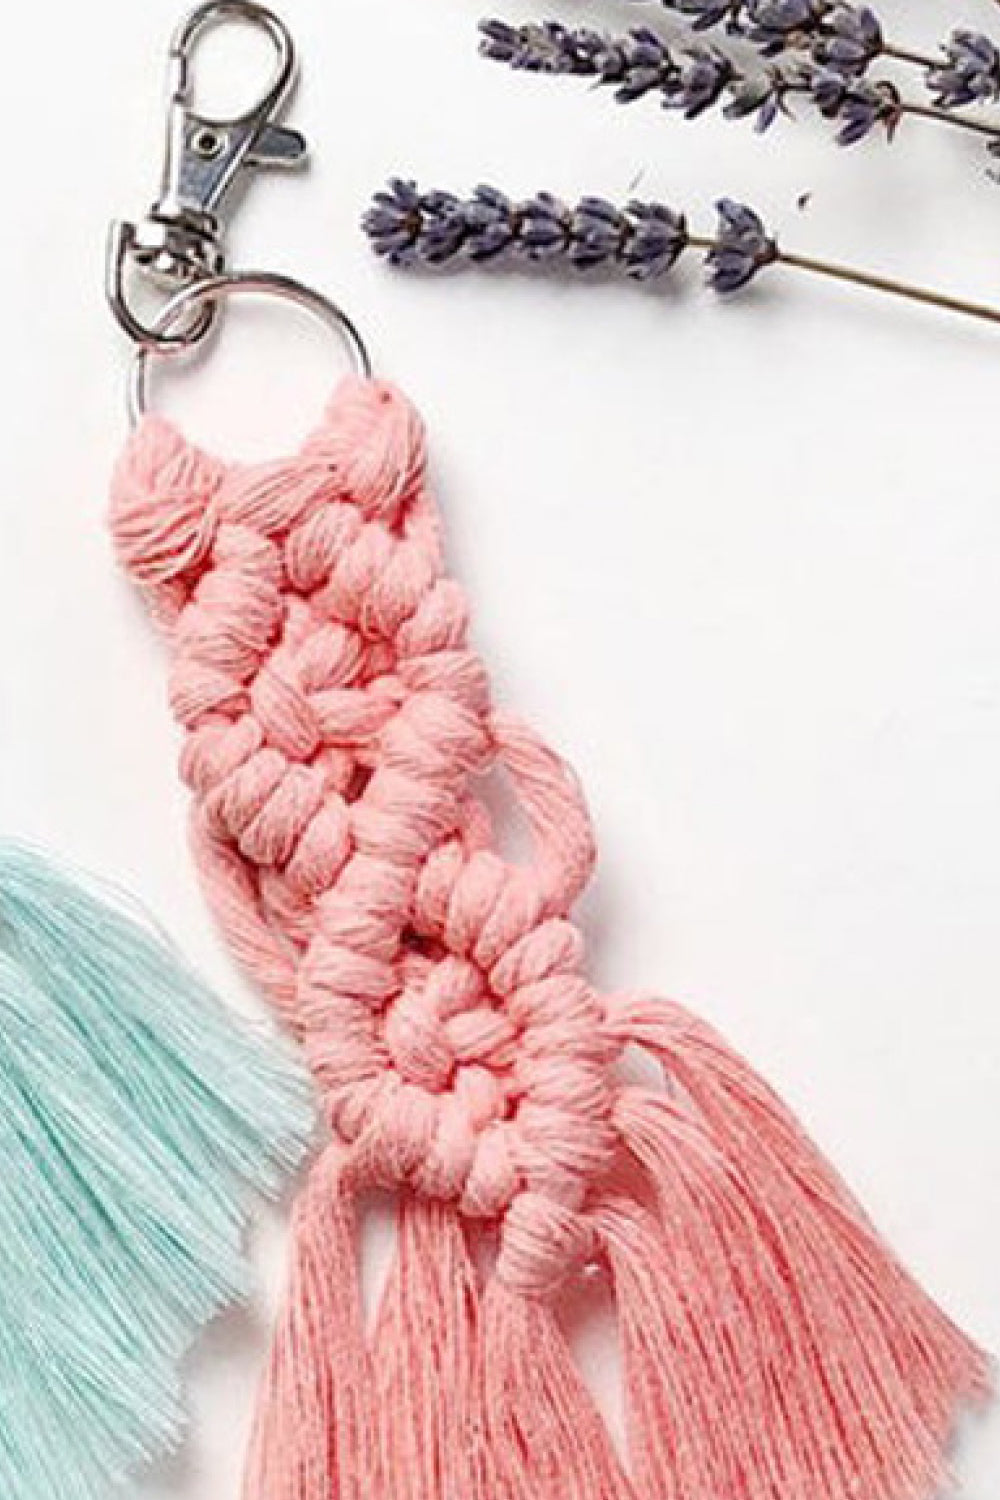 Trendsi Cupid Beauty Supplies Coral / One Size Keychains Assorted 4-Pack Macrame Fringe Keychain